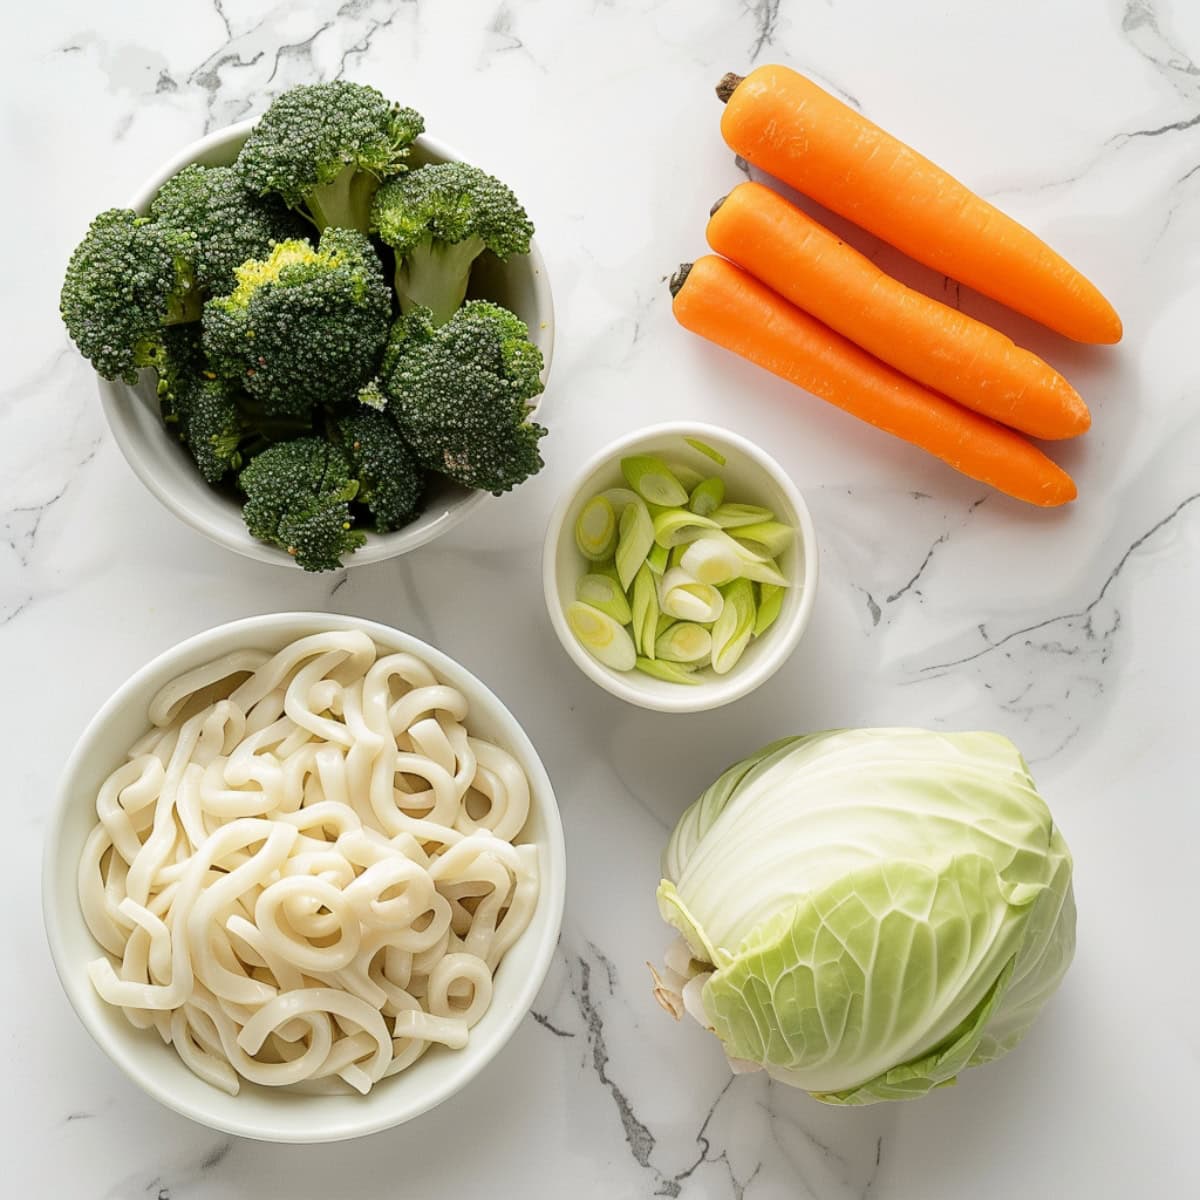 Carrots, broccoli florets, green onions, cabbage and udon noodles.